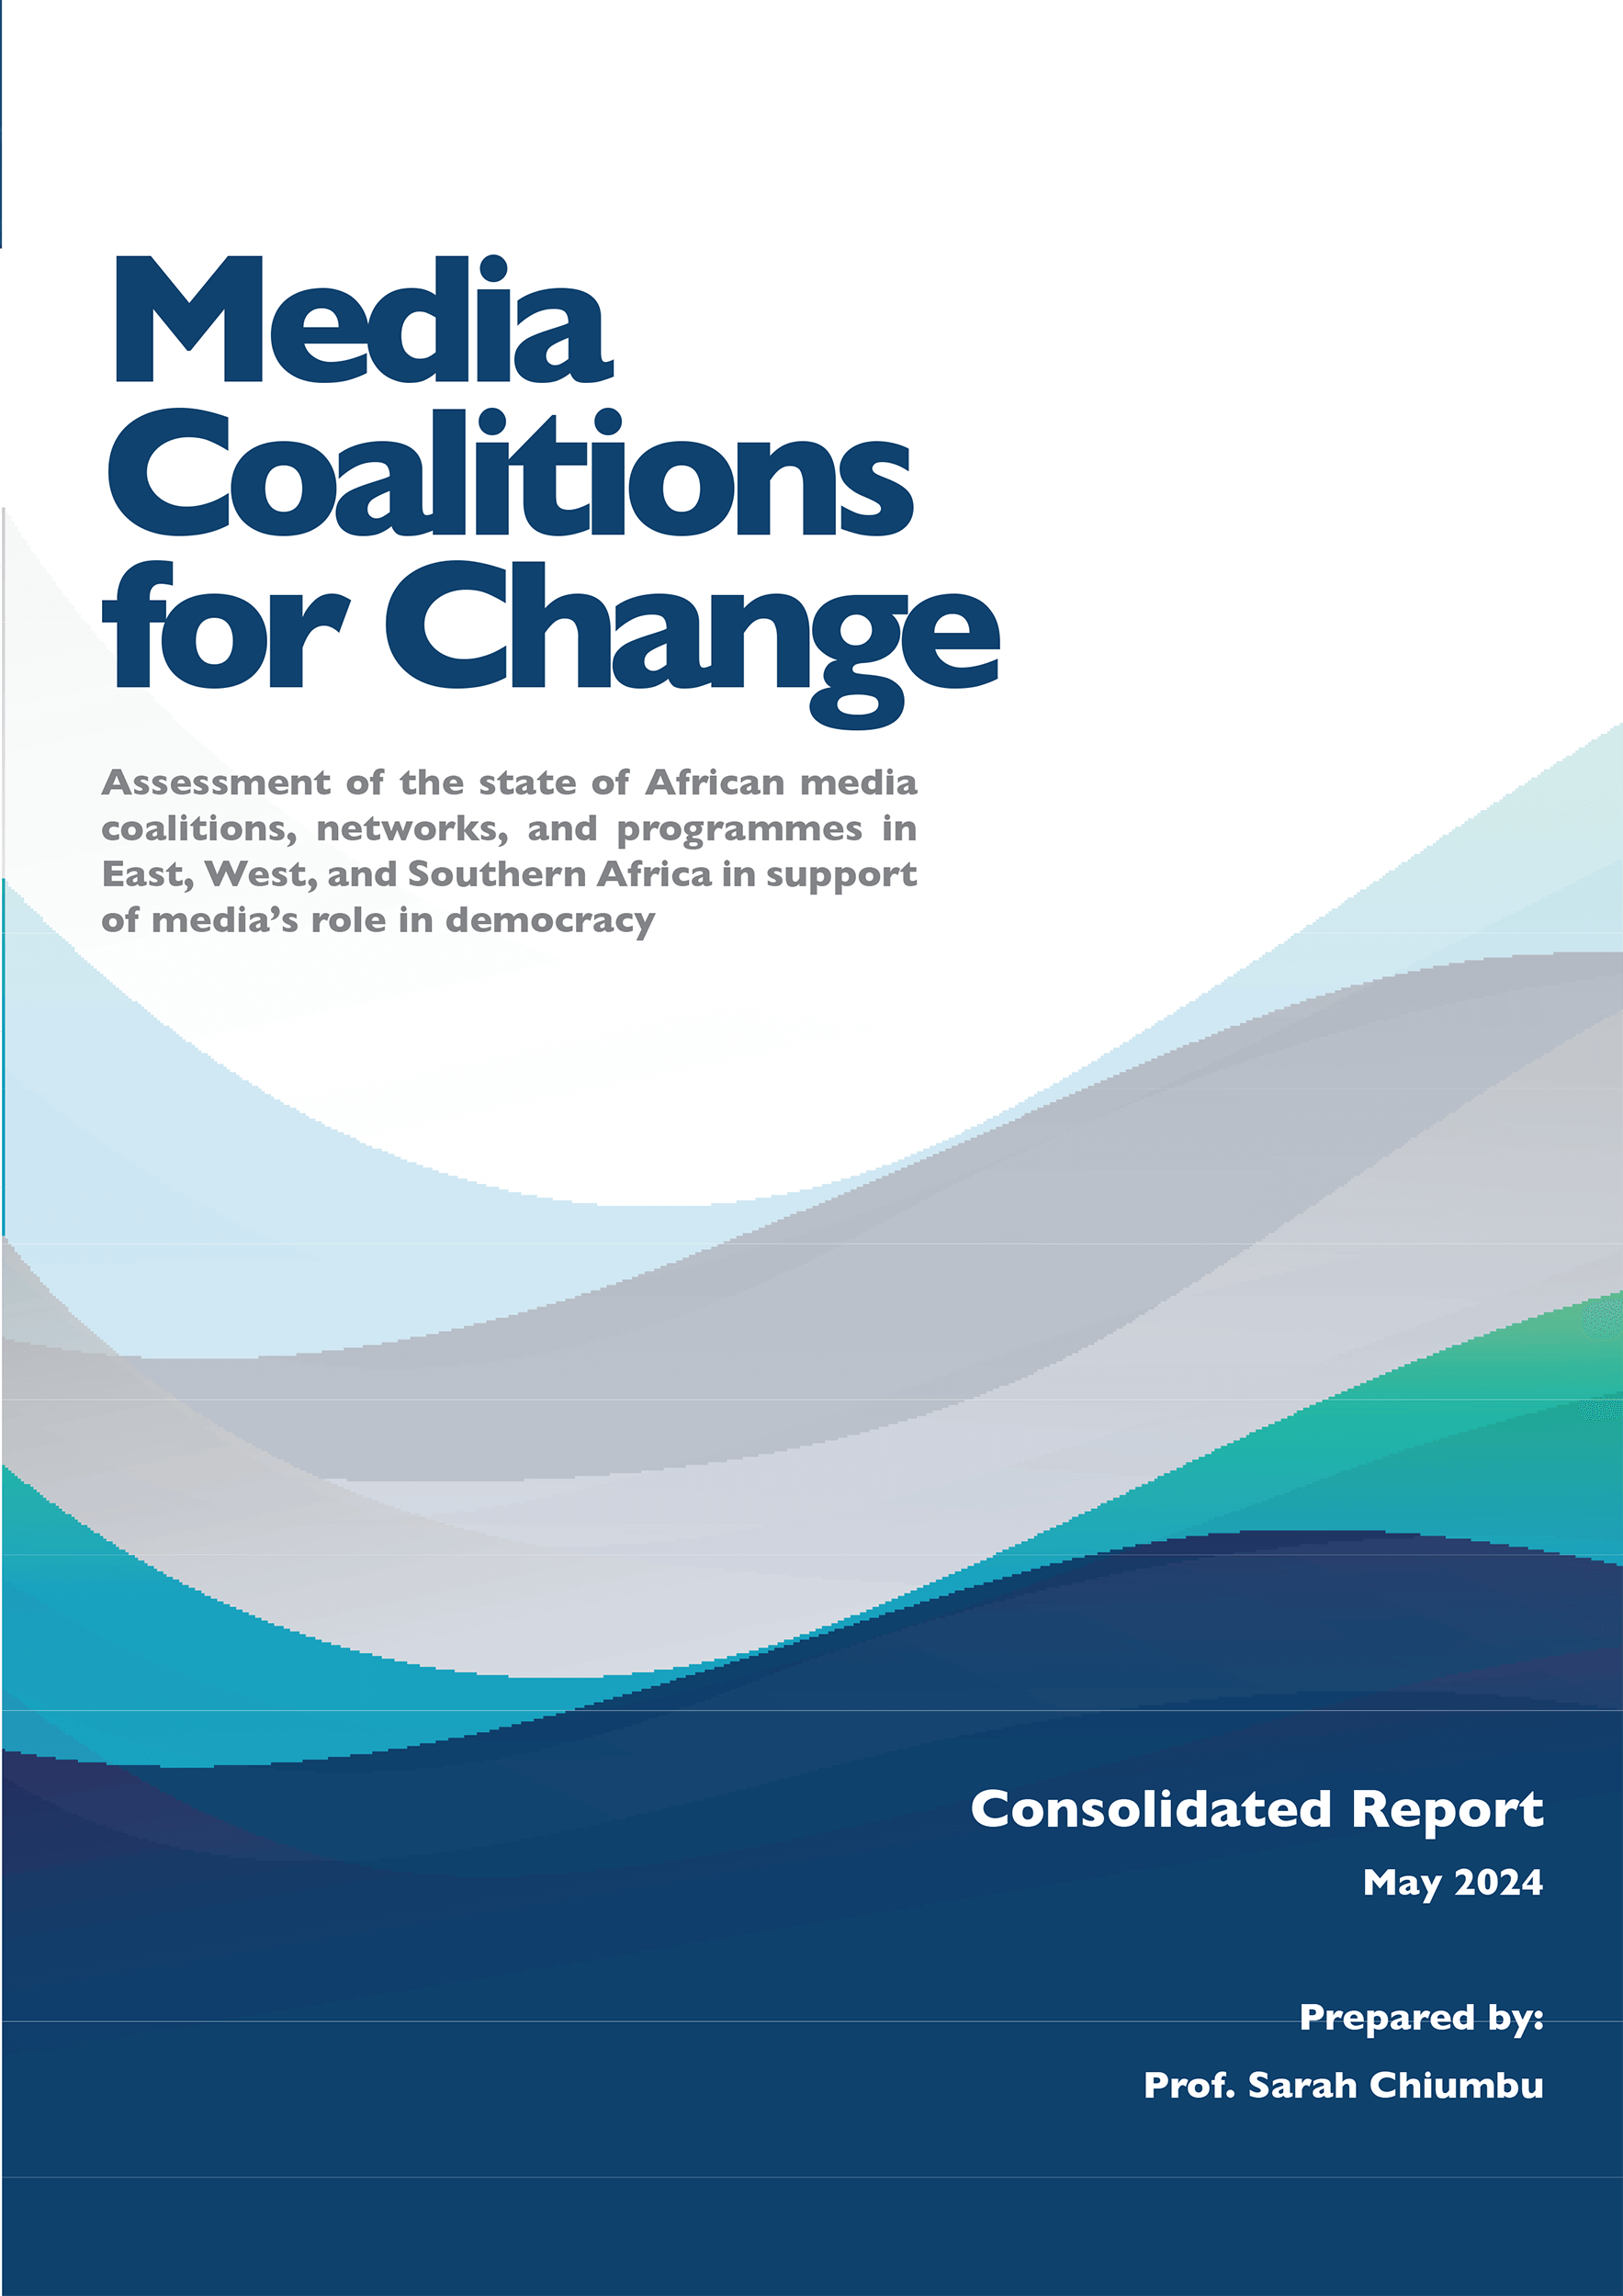 Media Coalitions for Change